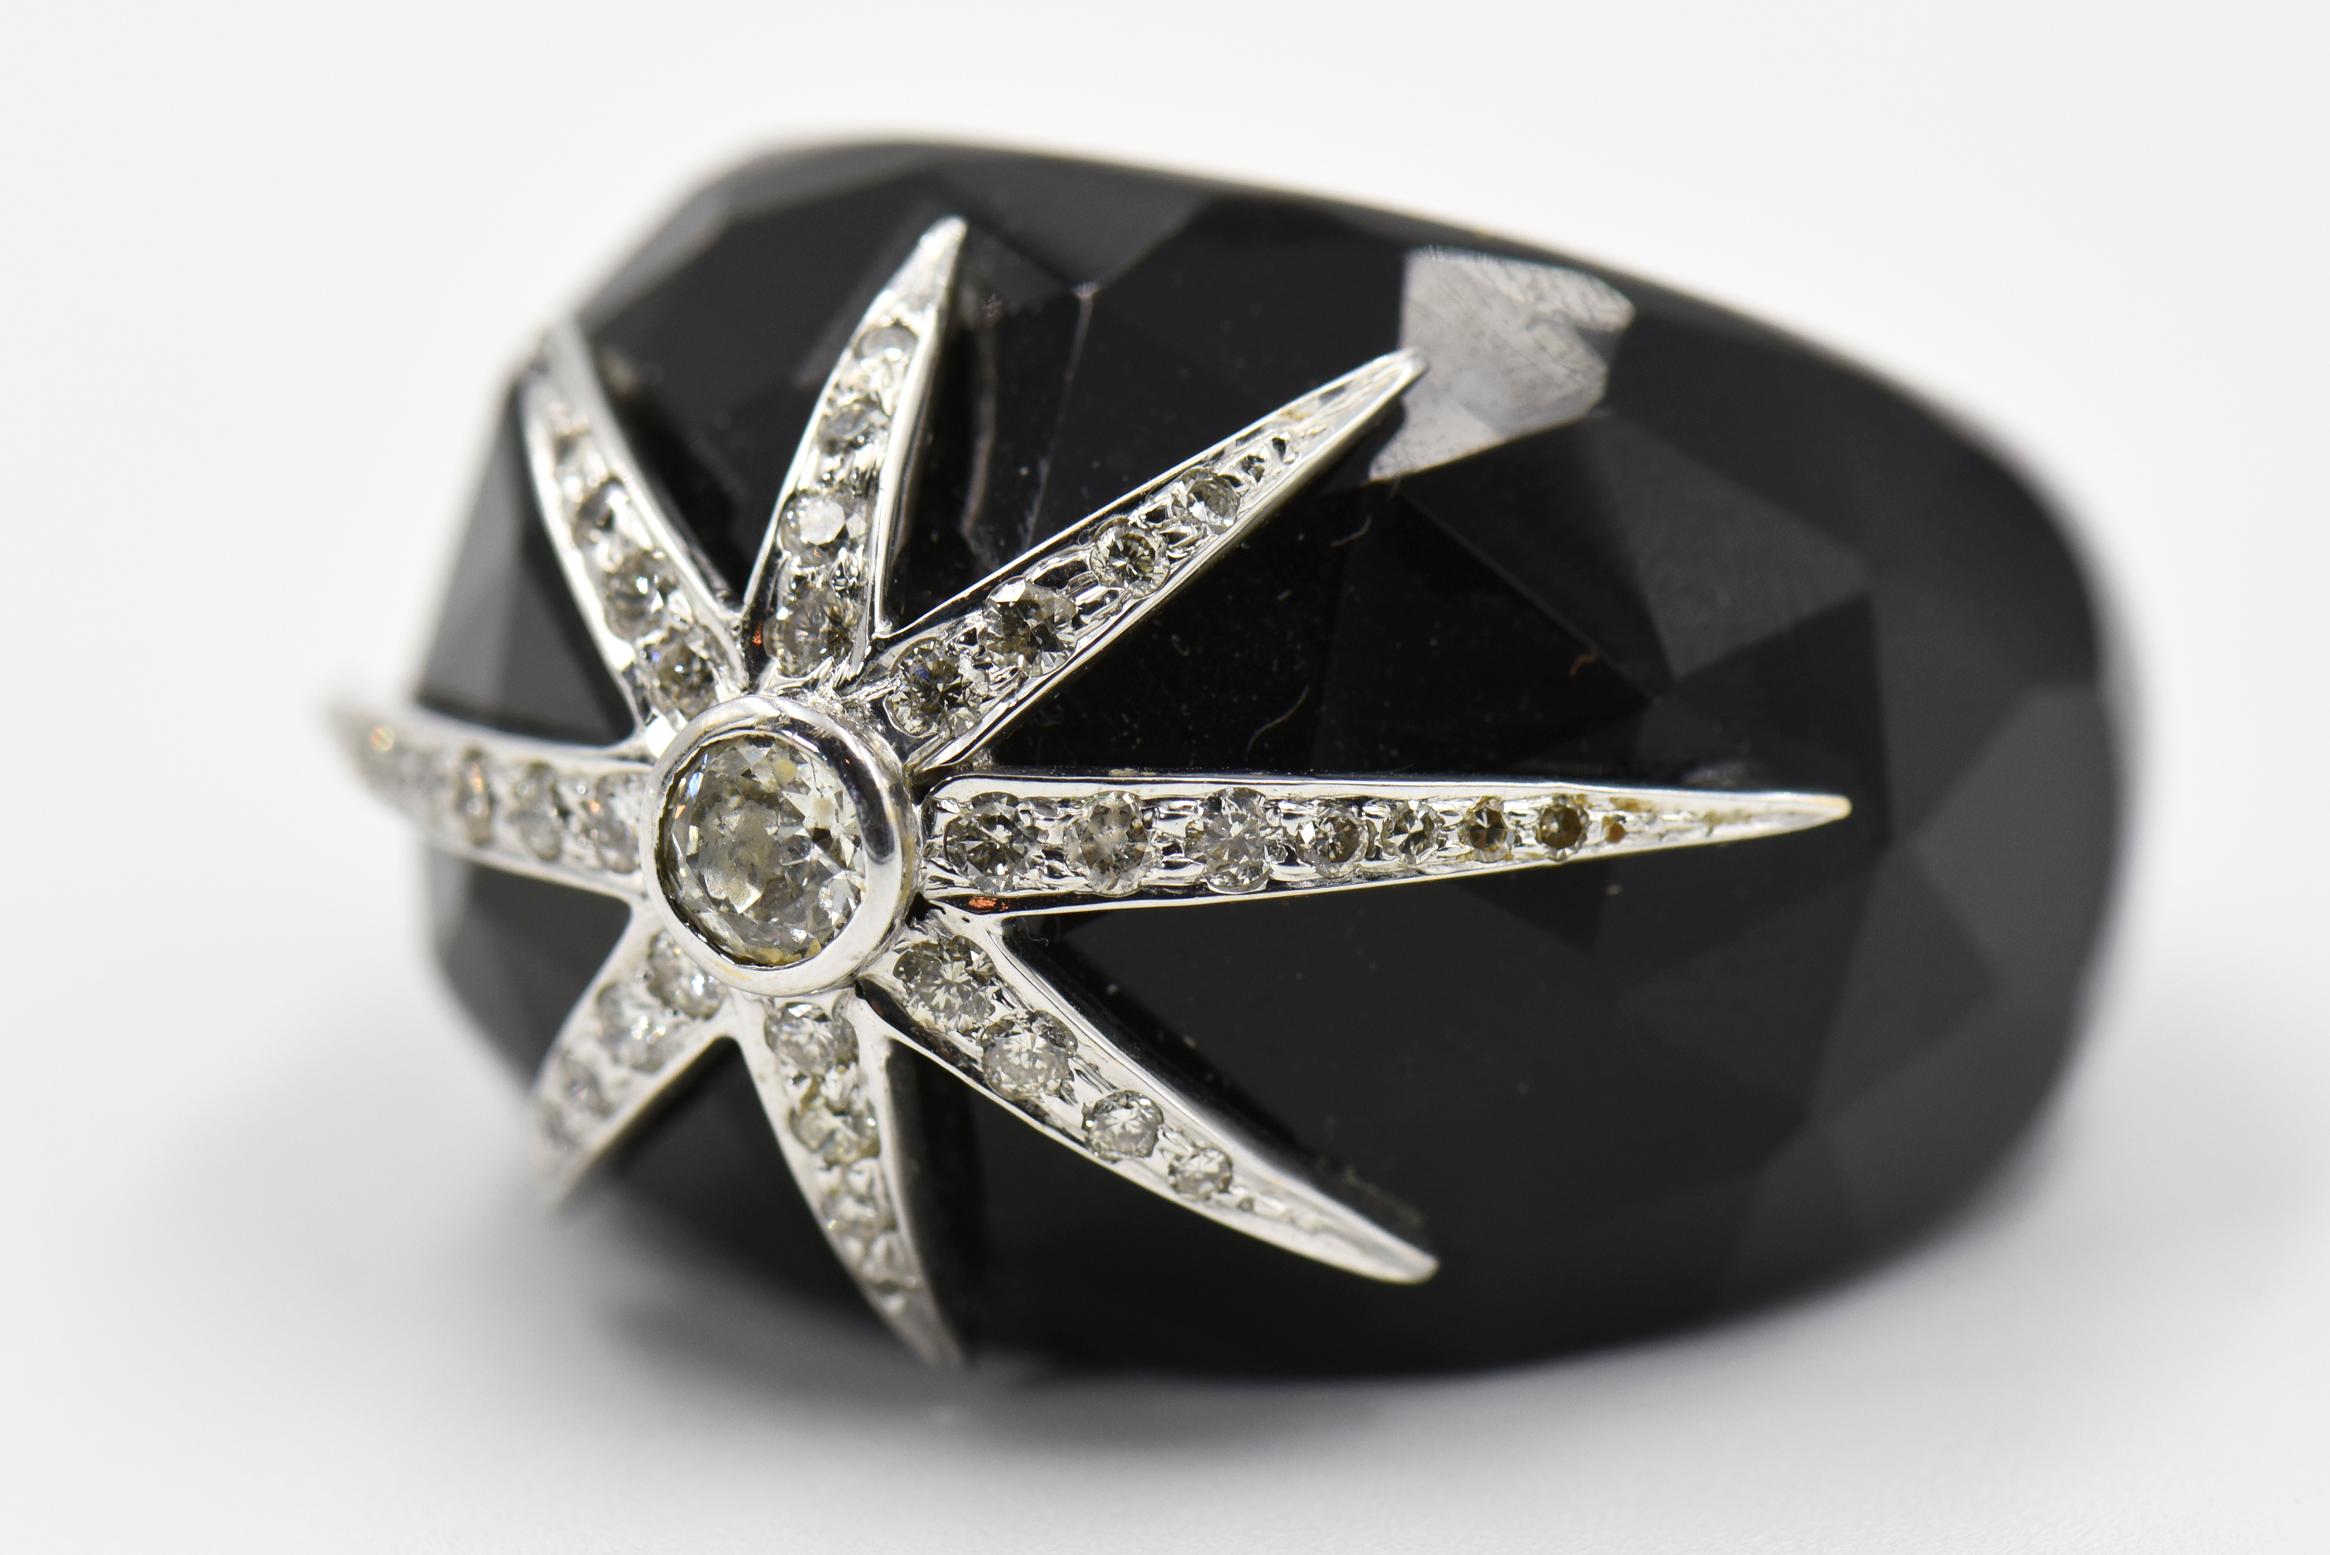 Dramatic faceted black onyx domed ring decorated with a 18k white gold and diamond star burst design.

The ring measures 1.25